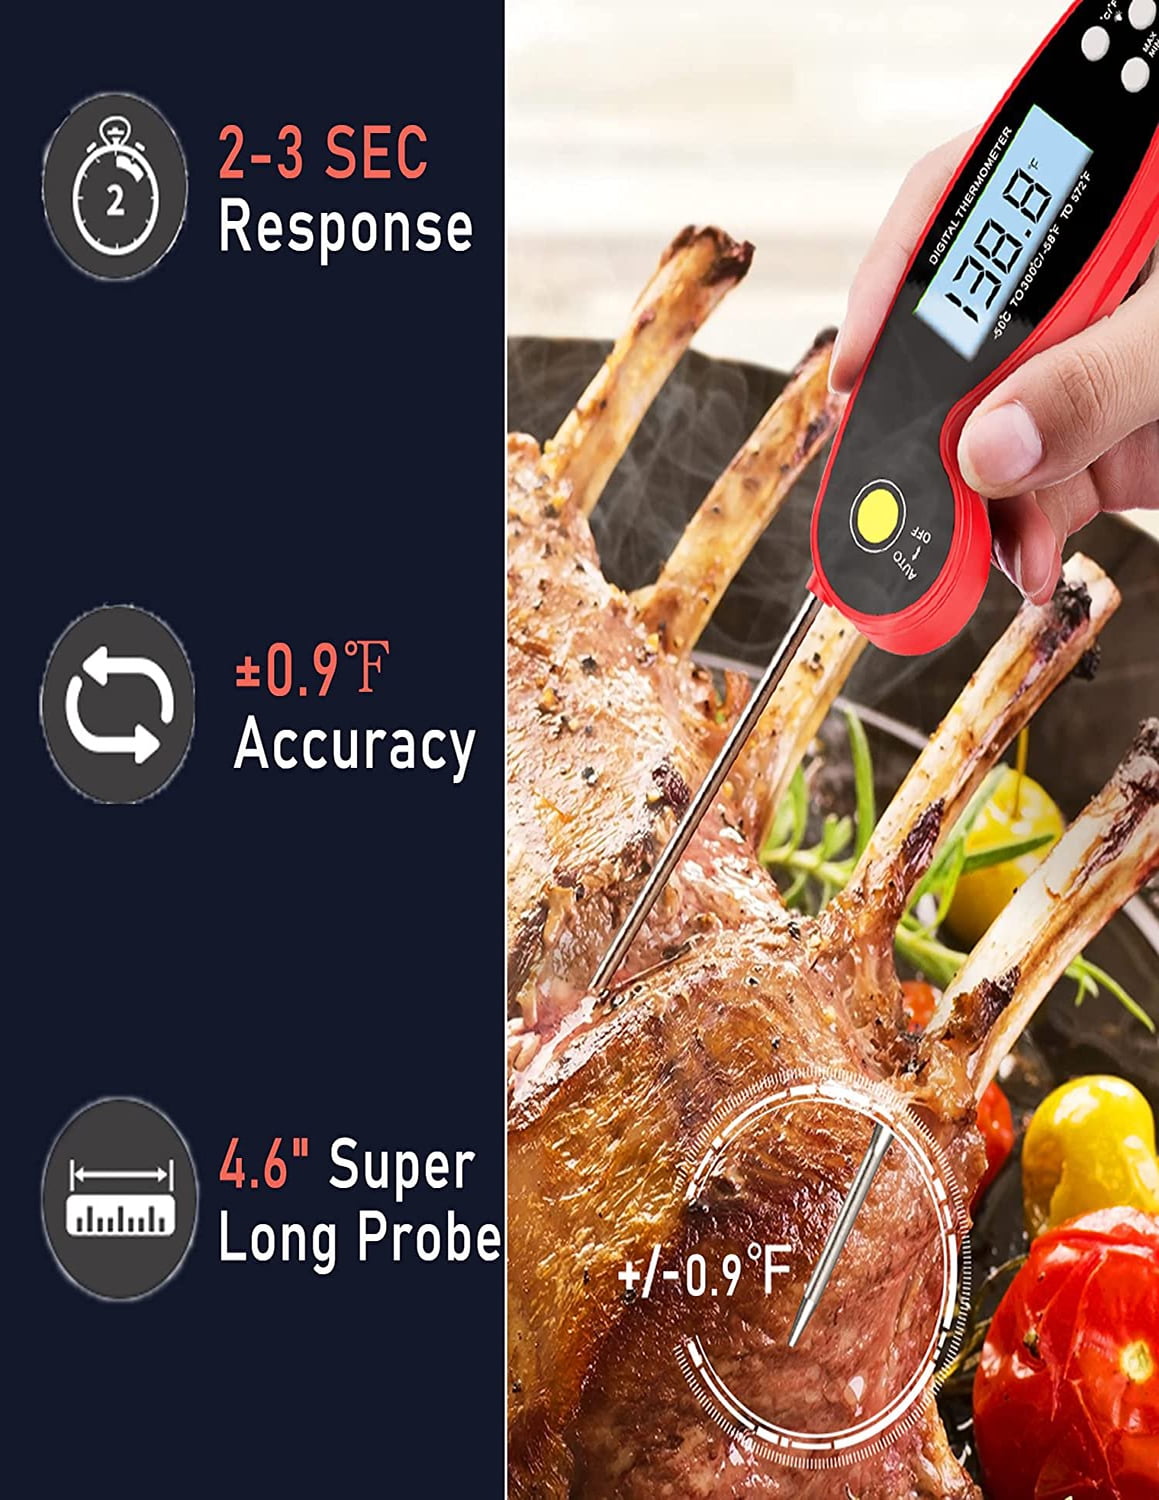 Lonicera Digital Meat Thermometer for Food Cooking. Waterproof & Instant  Read for Kitchen Baking, BBQ. with Foldable Probe, Backlight & Calibration